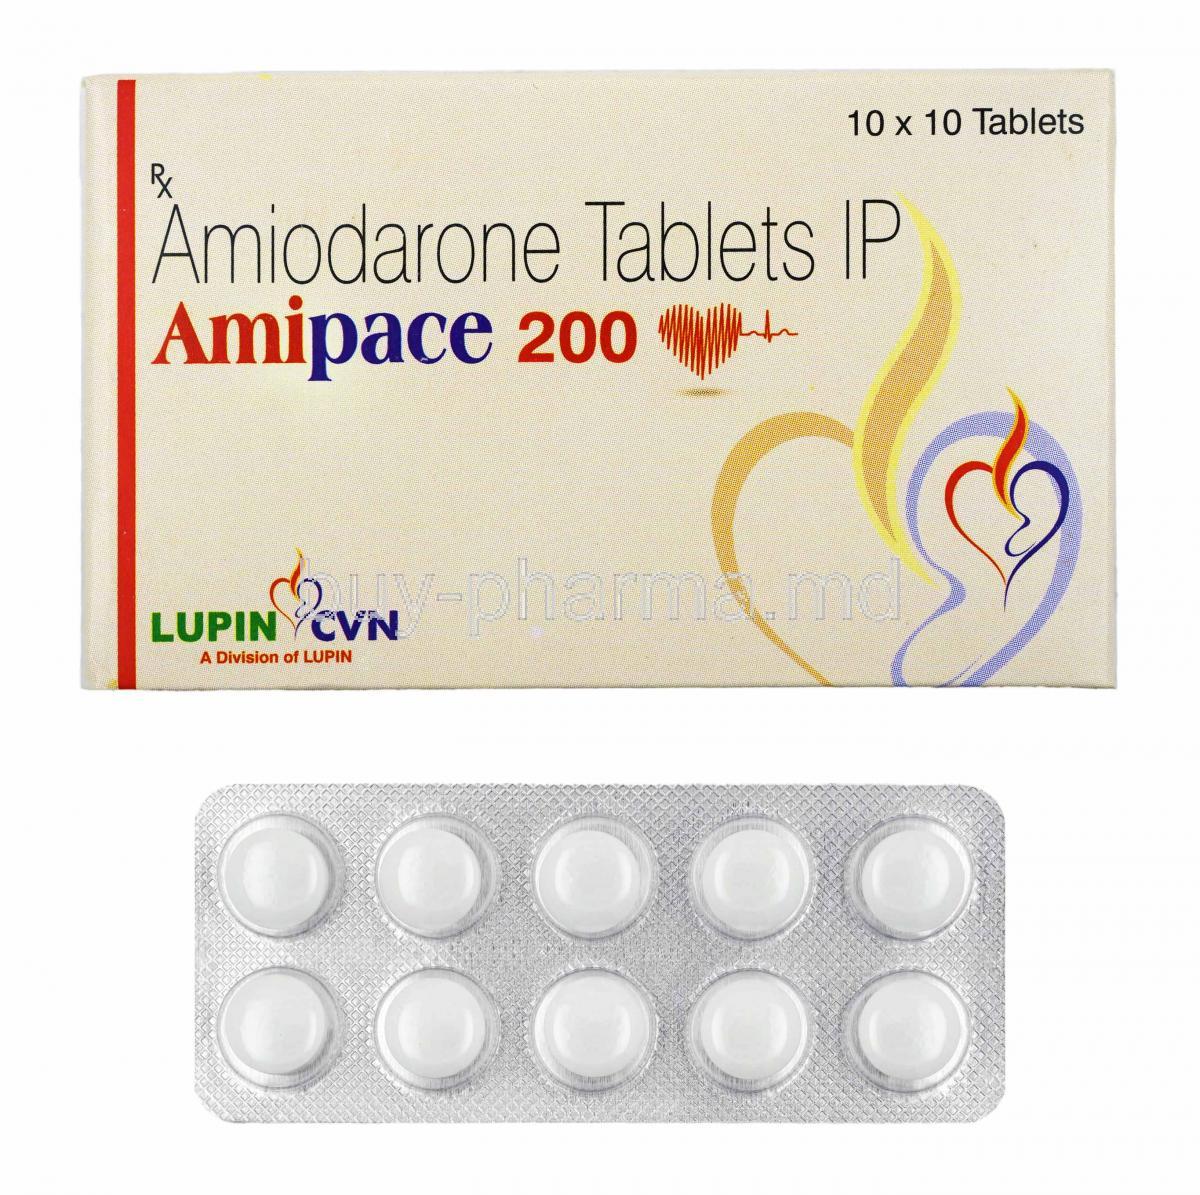 Amipace, Amiodarone 200mg box and tablets